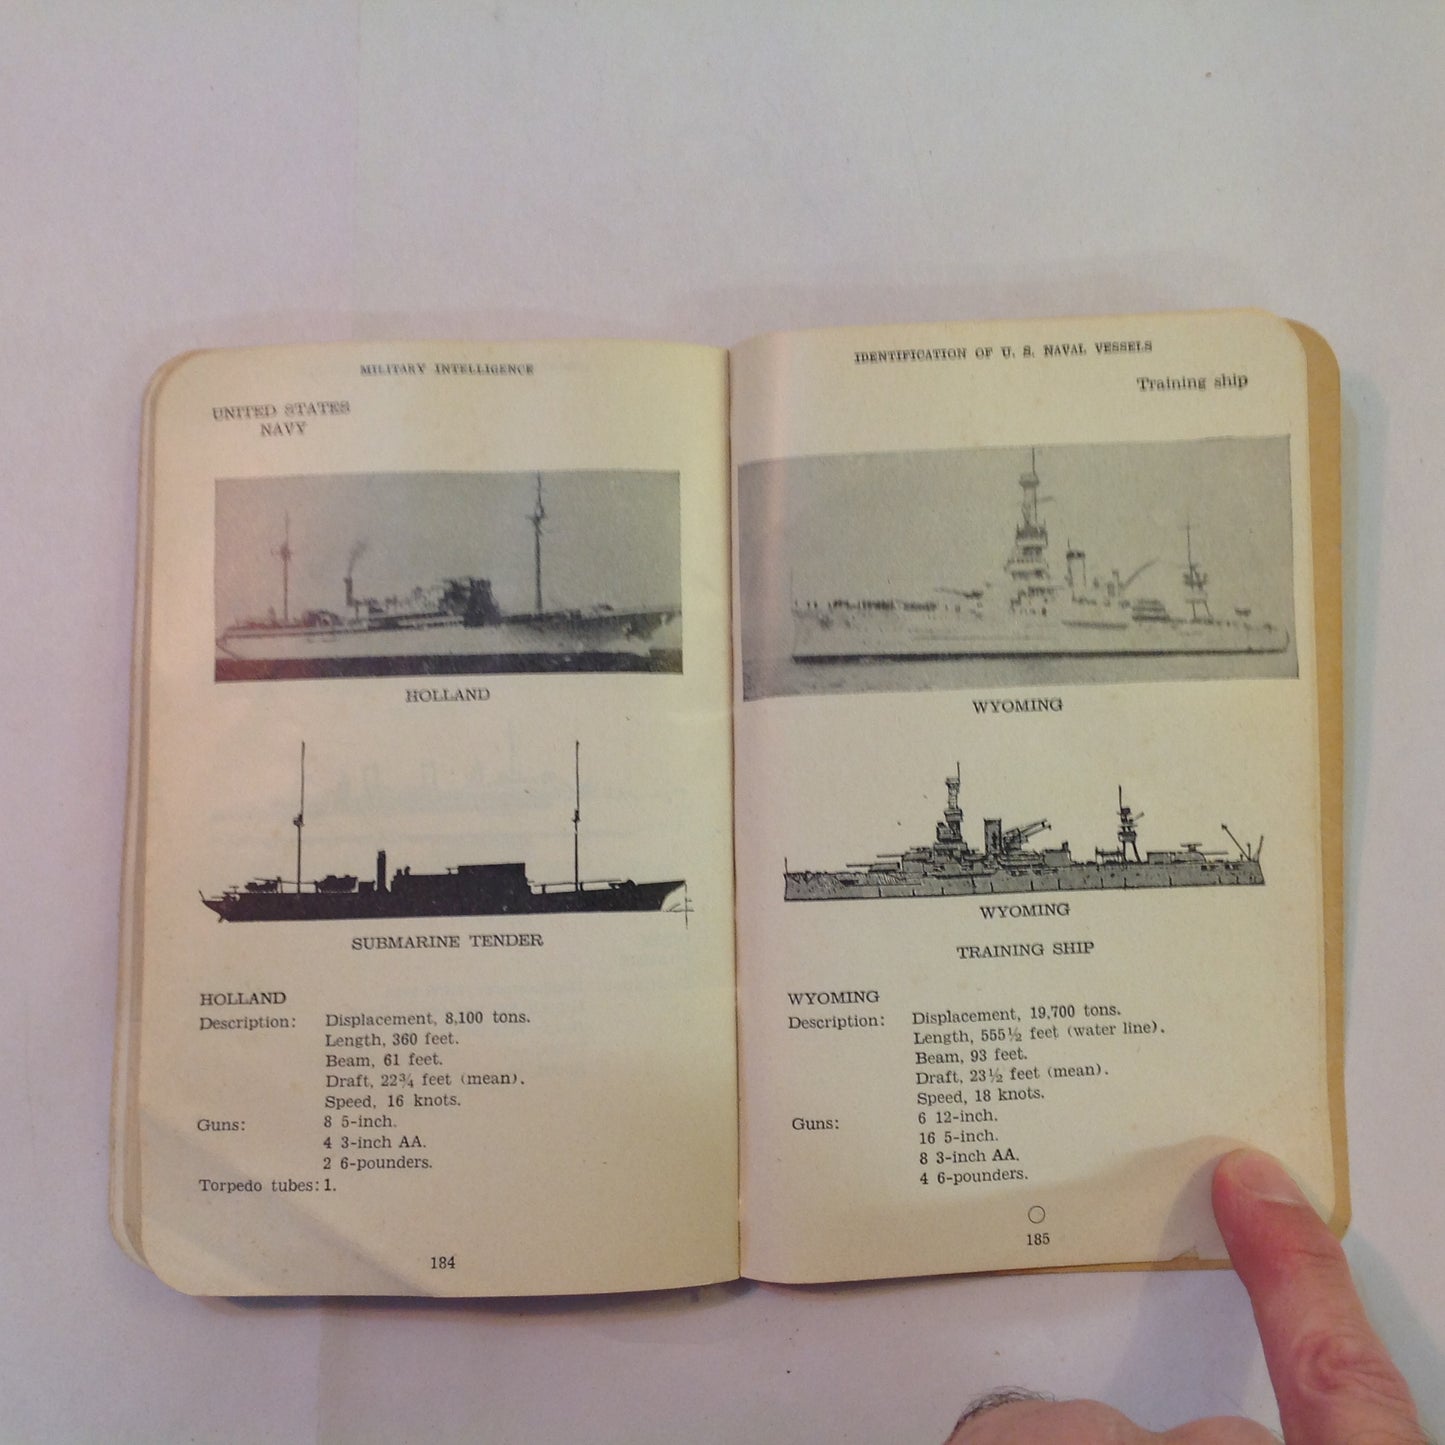 Vintage 1941 United States War Department Basic Field Manual Military Intelligence Identification of US Naval Vessels